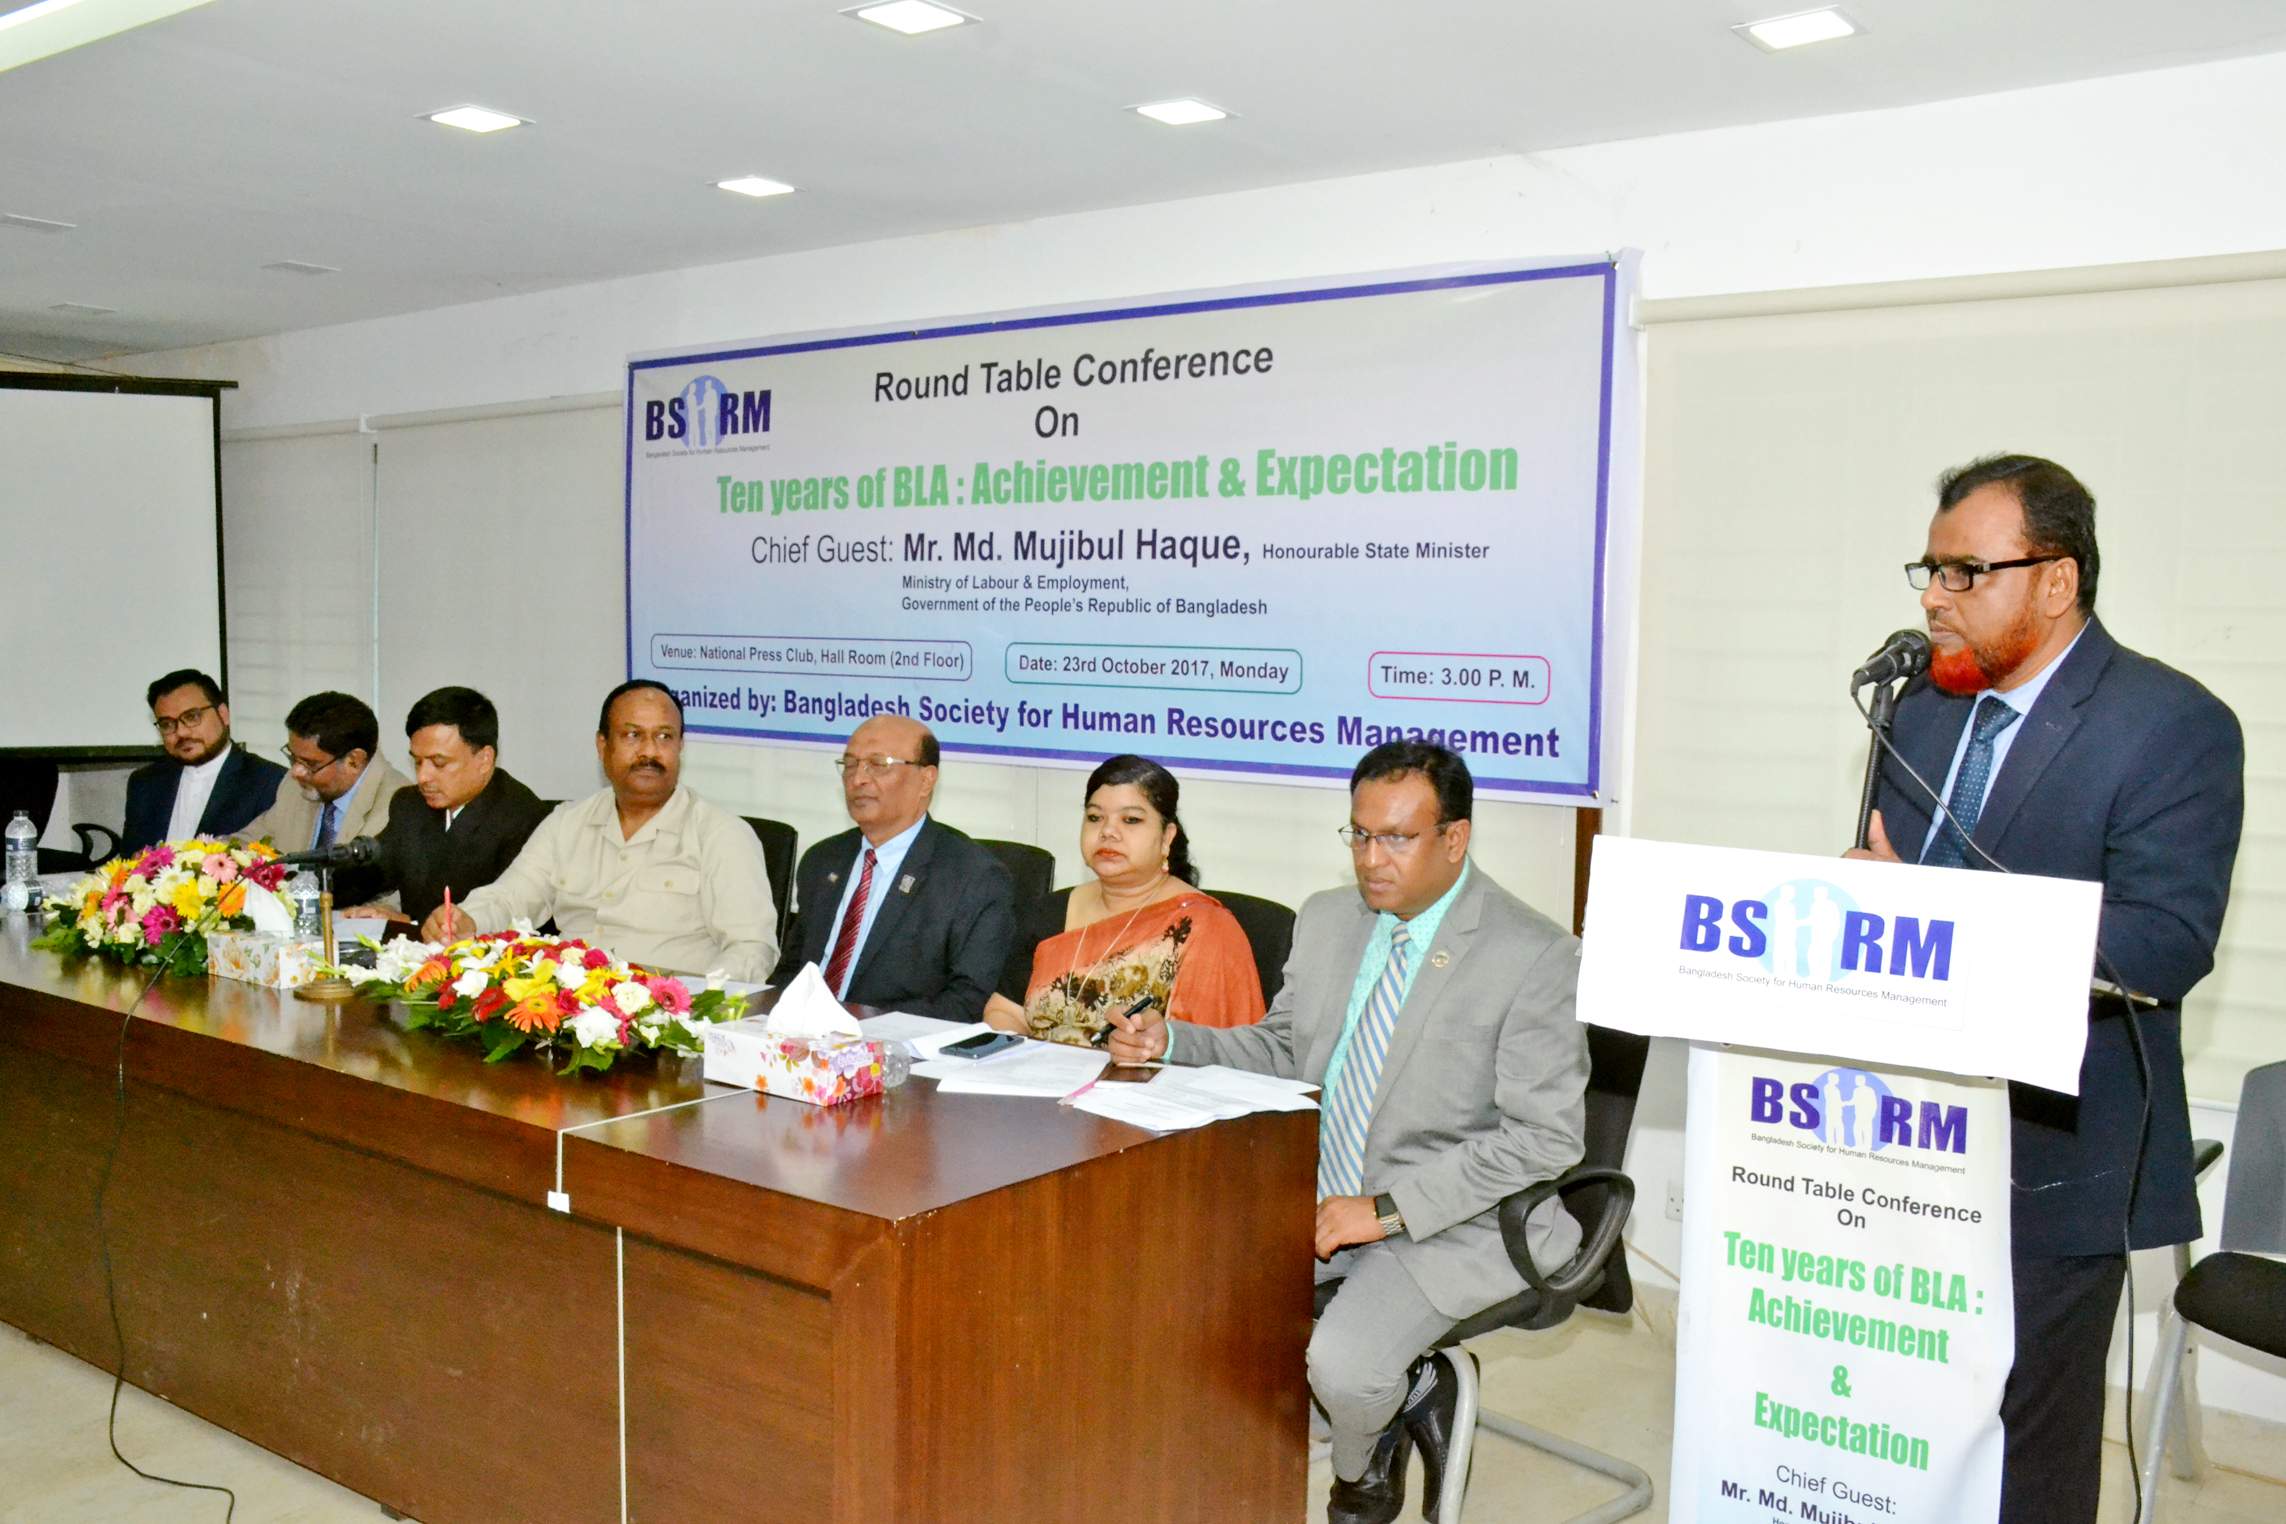 Round Table Conference on Ten Years of BLA : Achievement & Expectation